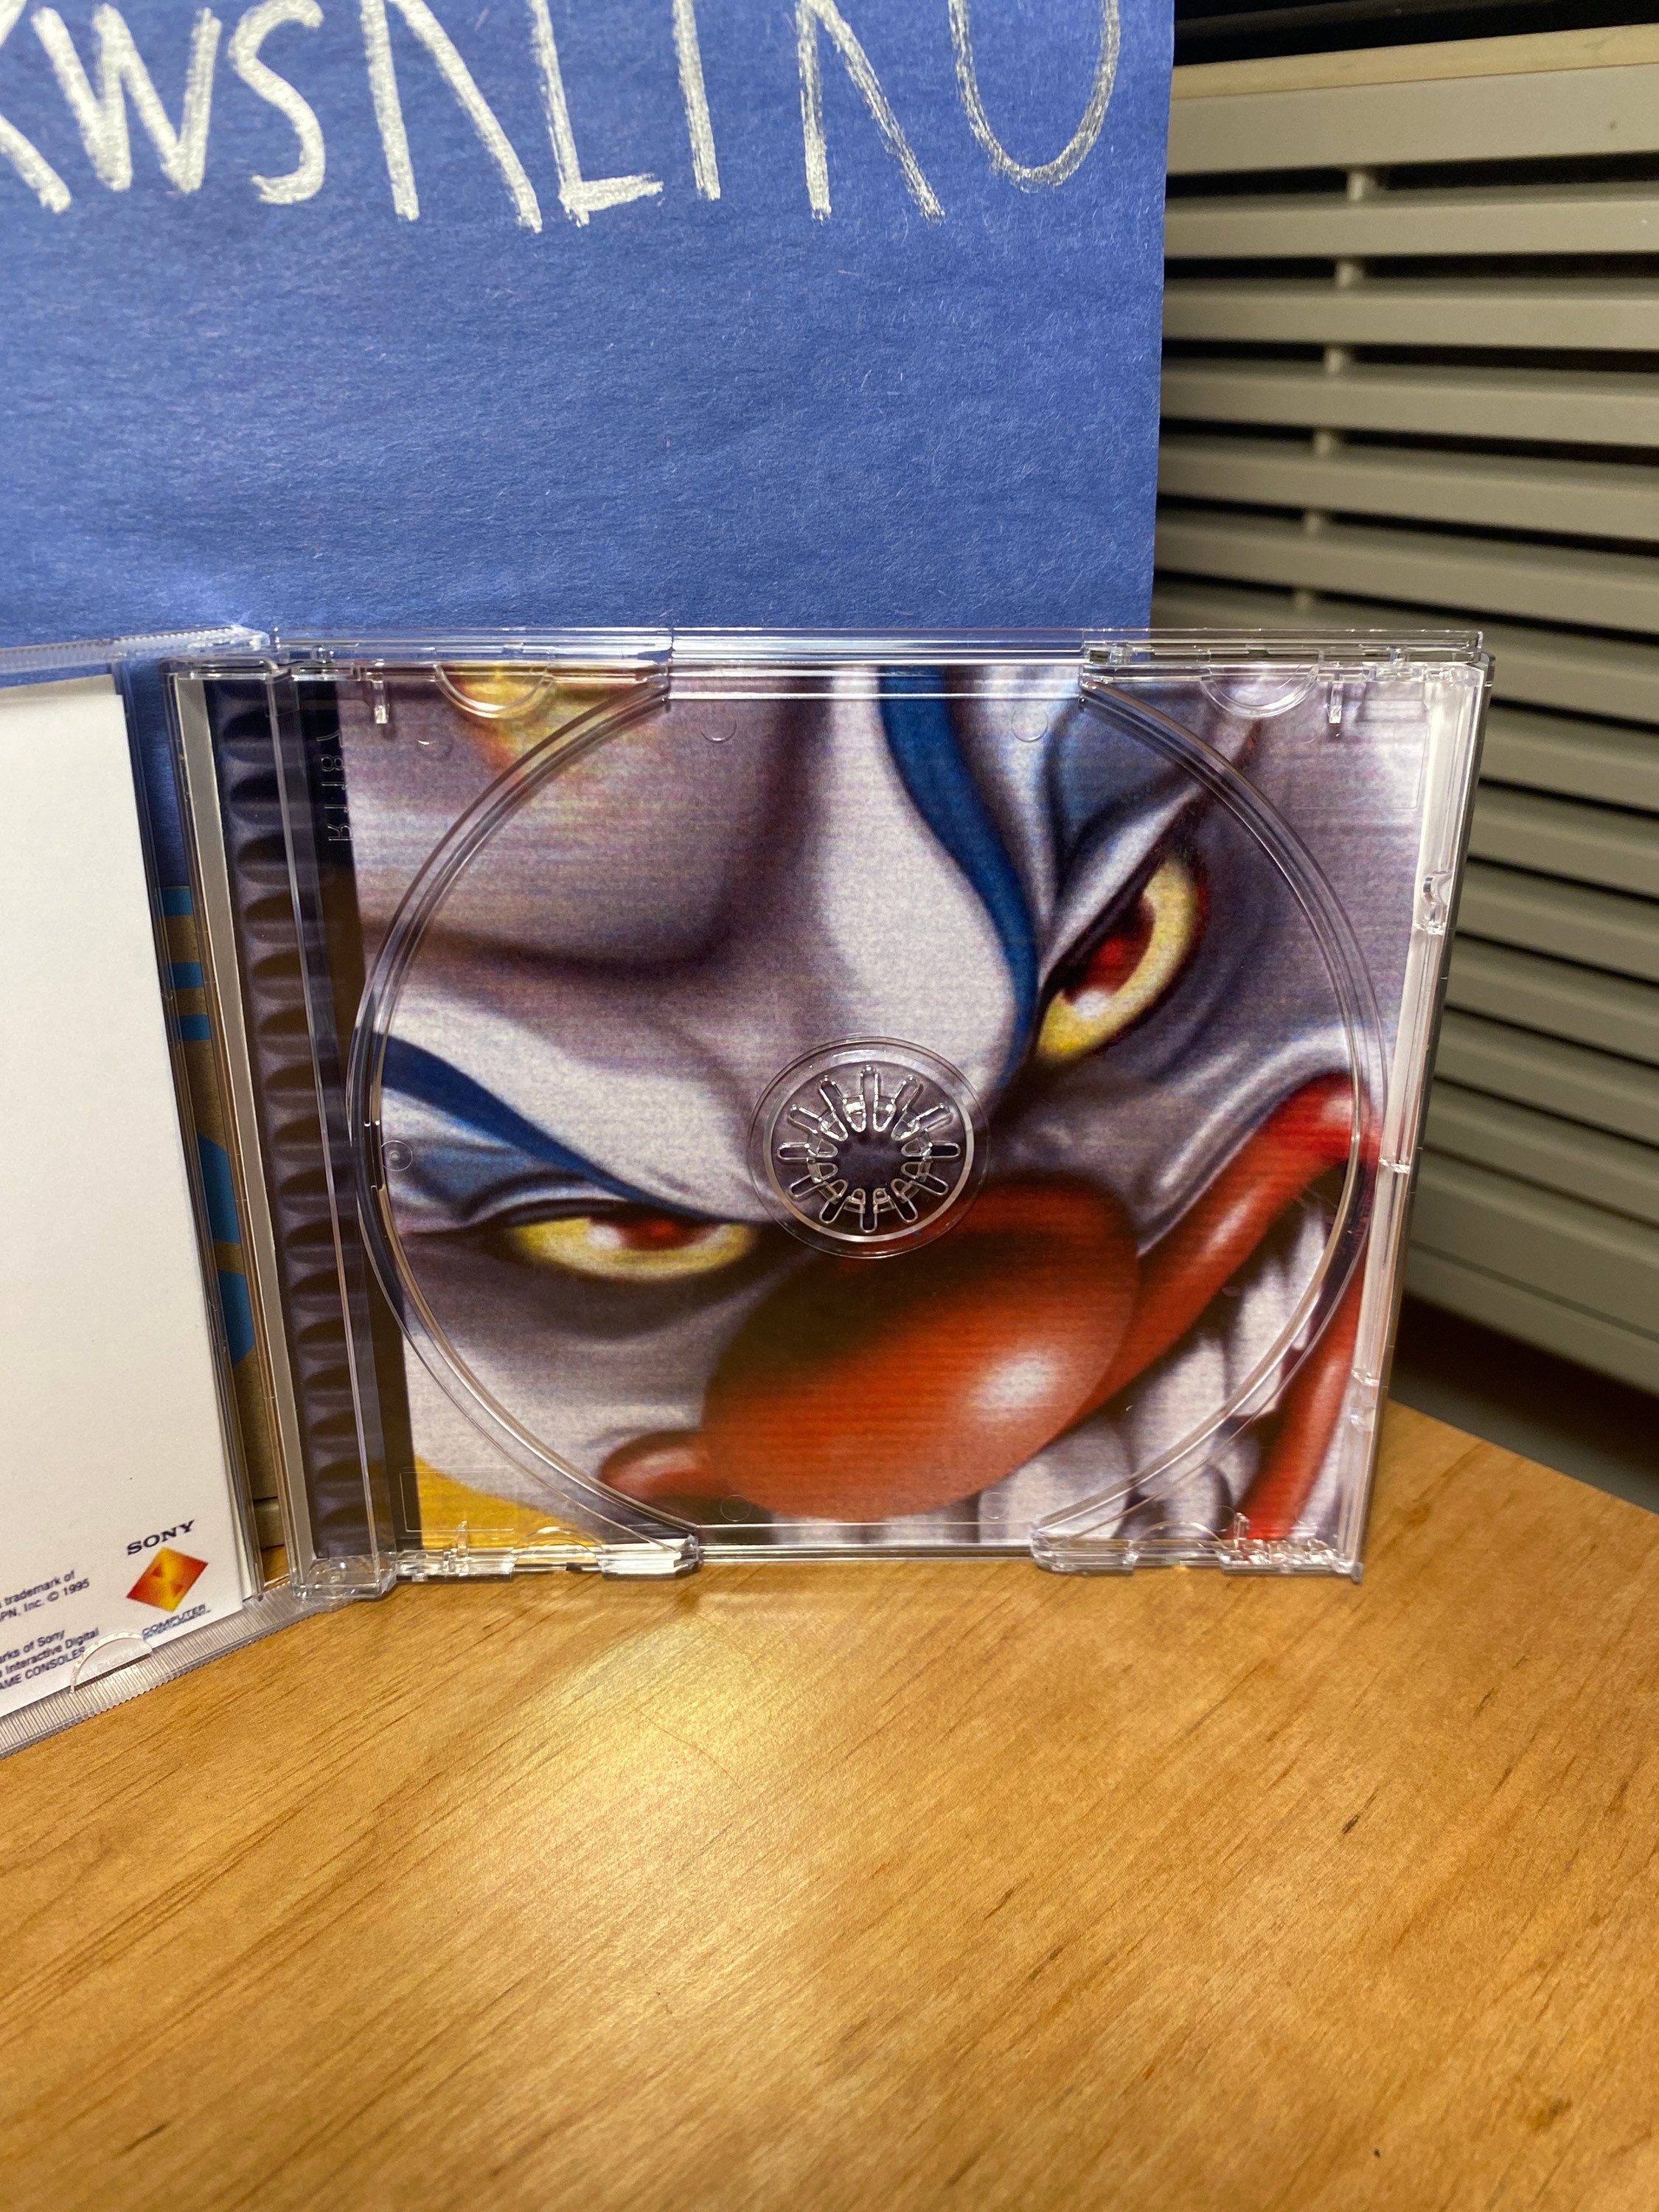 Twisted Metal 4 REPRODUCTION CASE No Disc Ps1 -  Sweden